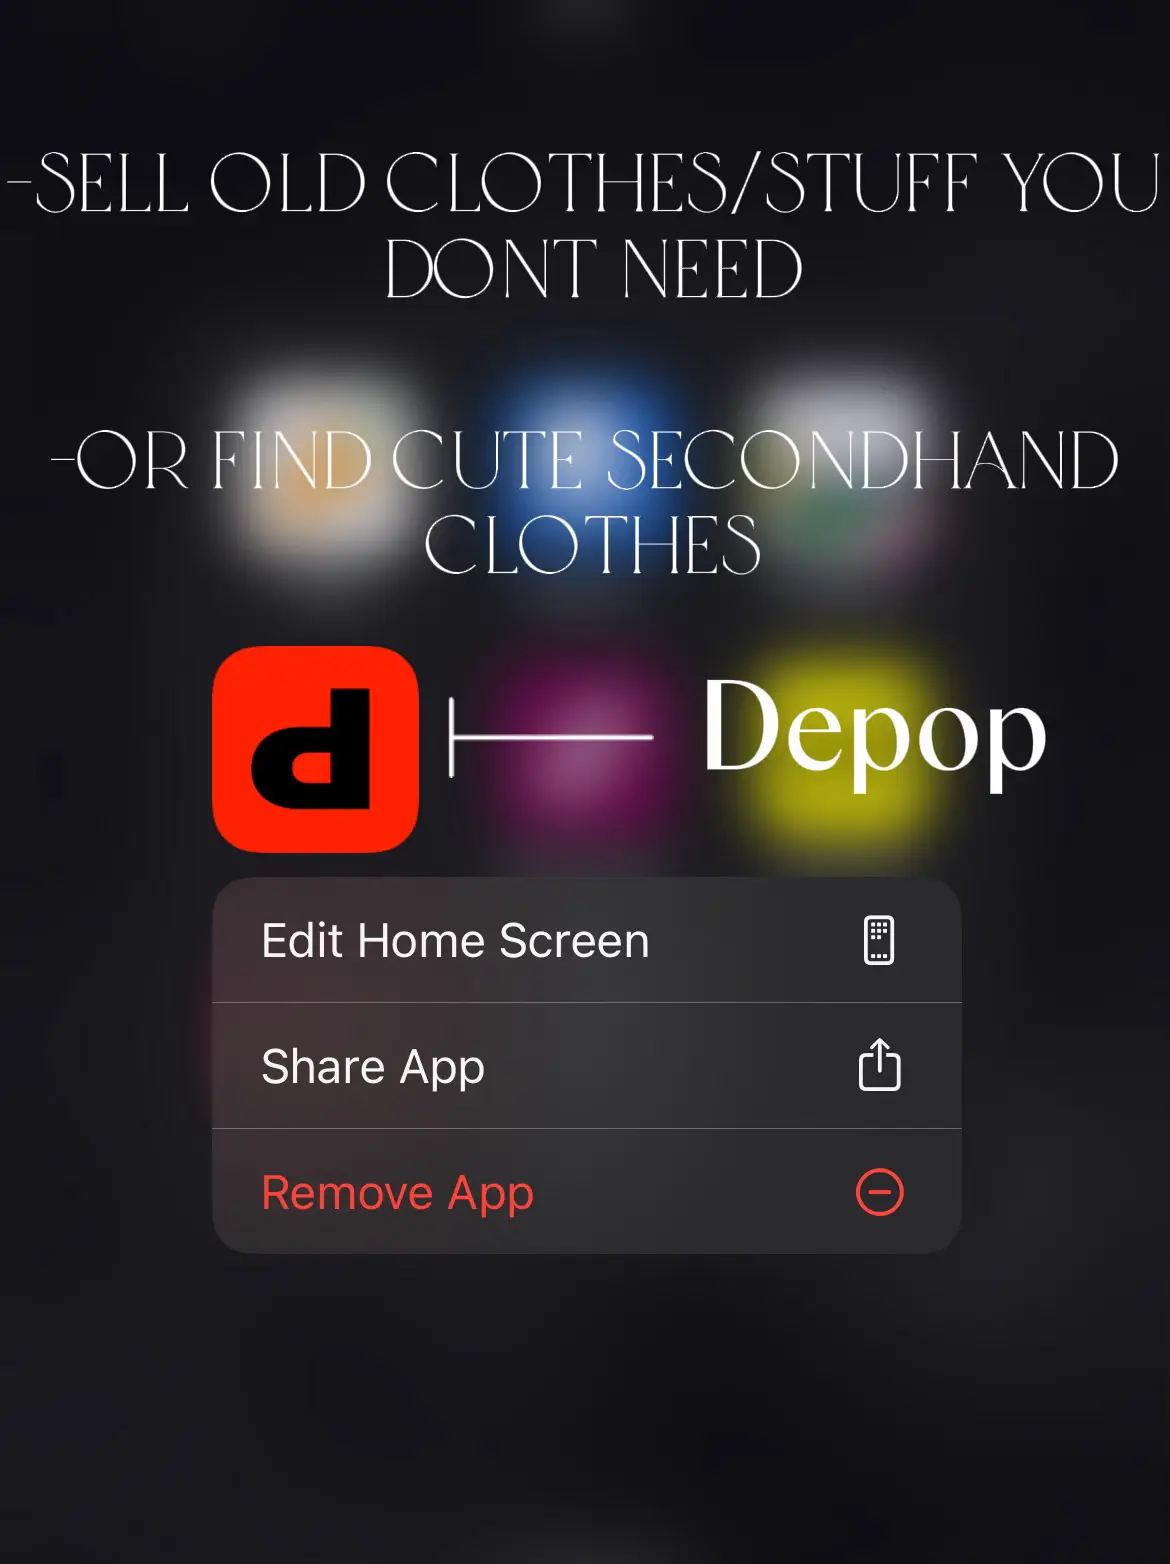  A screen showing a list of apps.